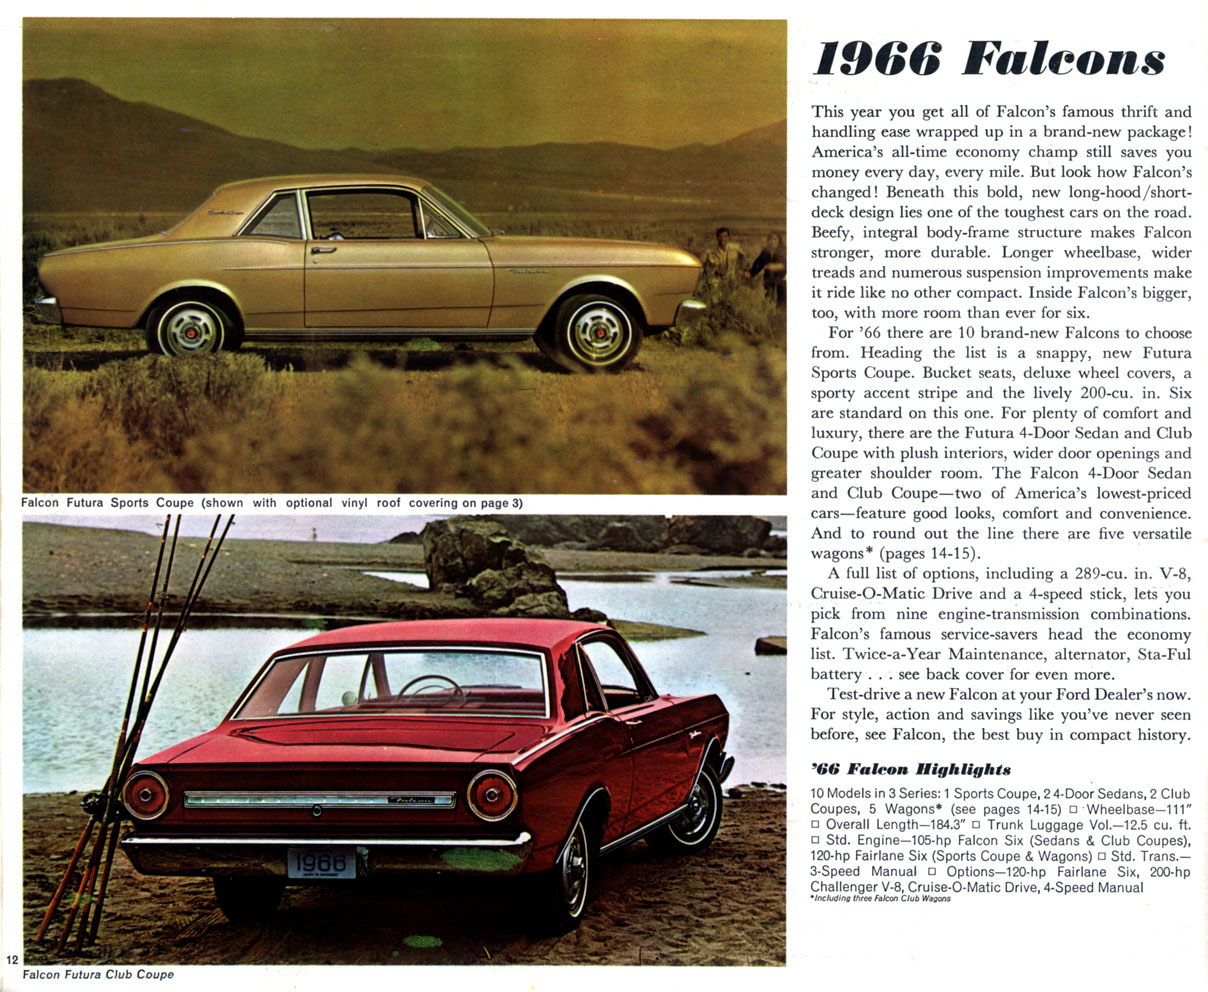 1966 Ford Full-Line Brochure Page 3